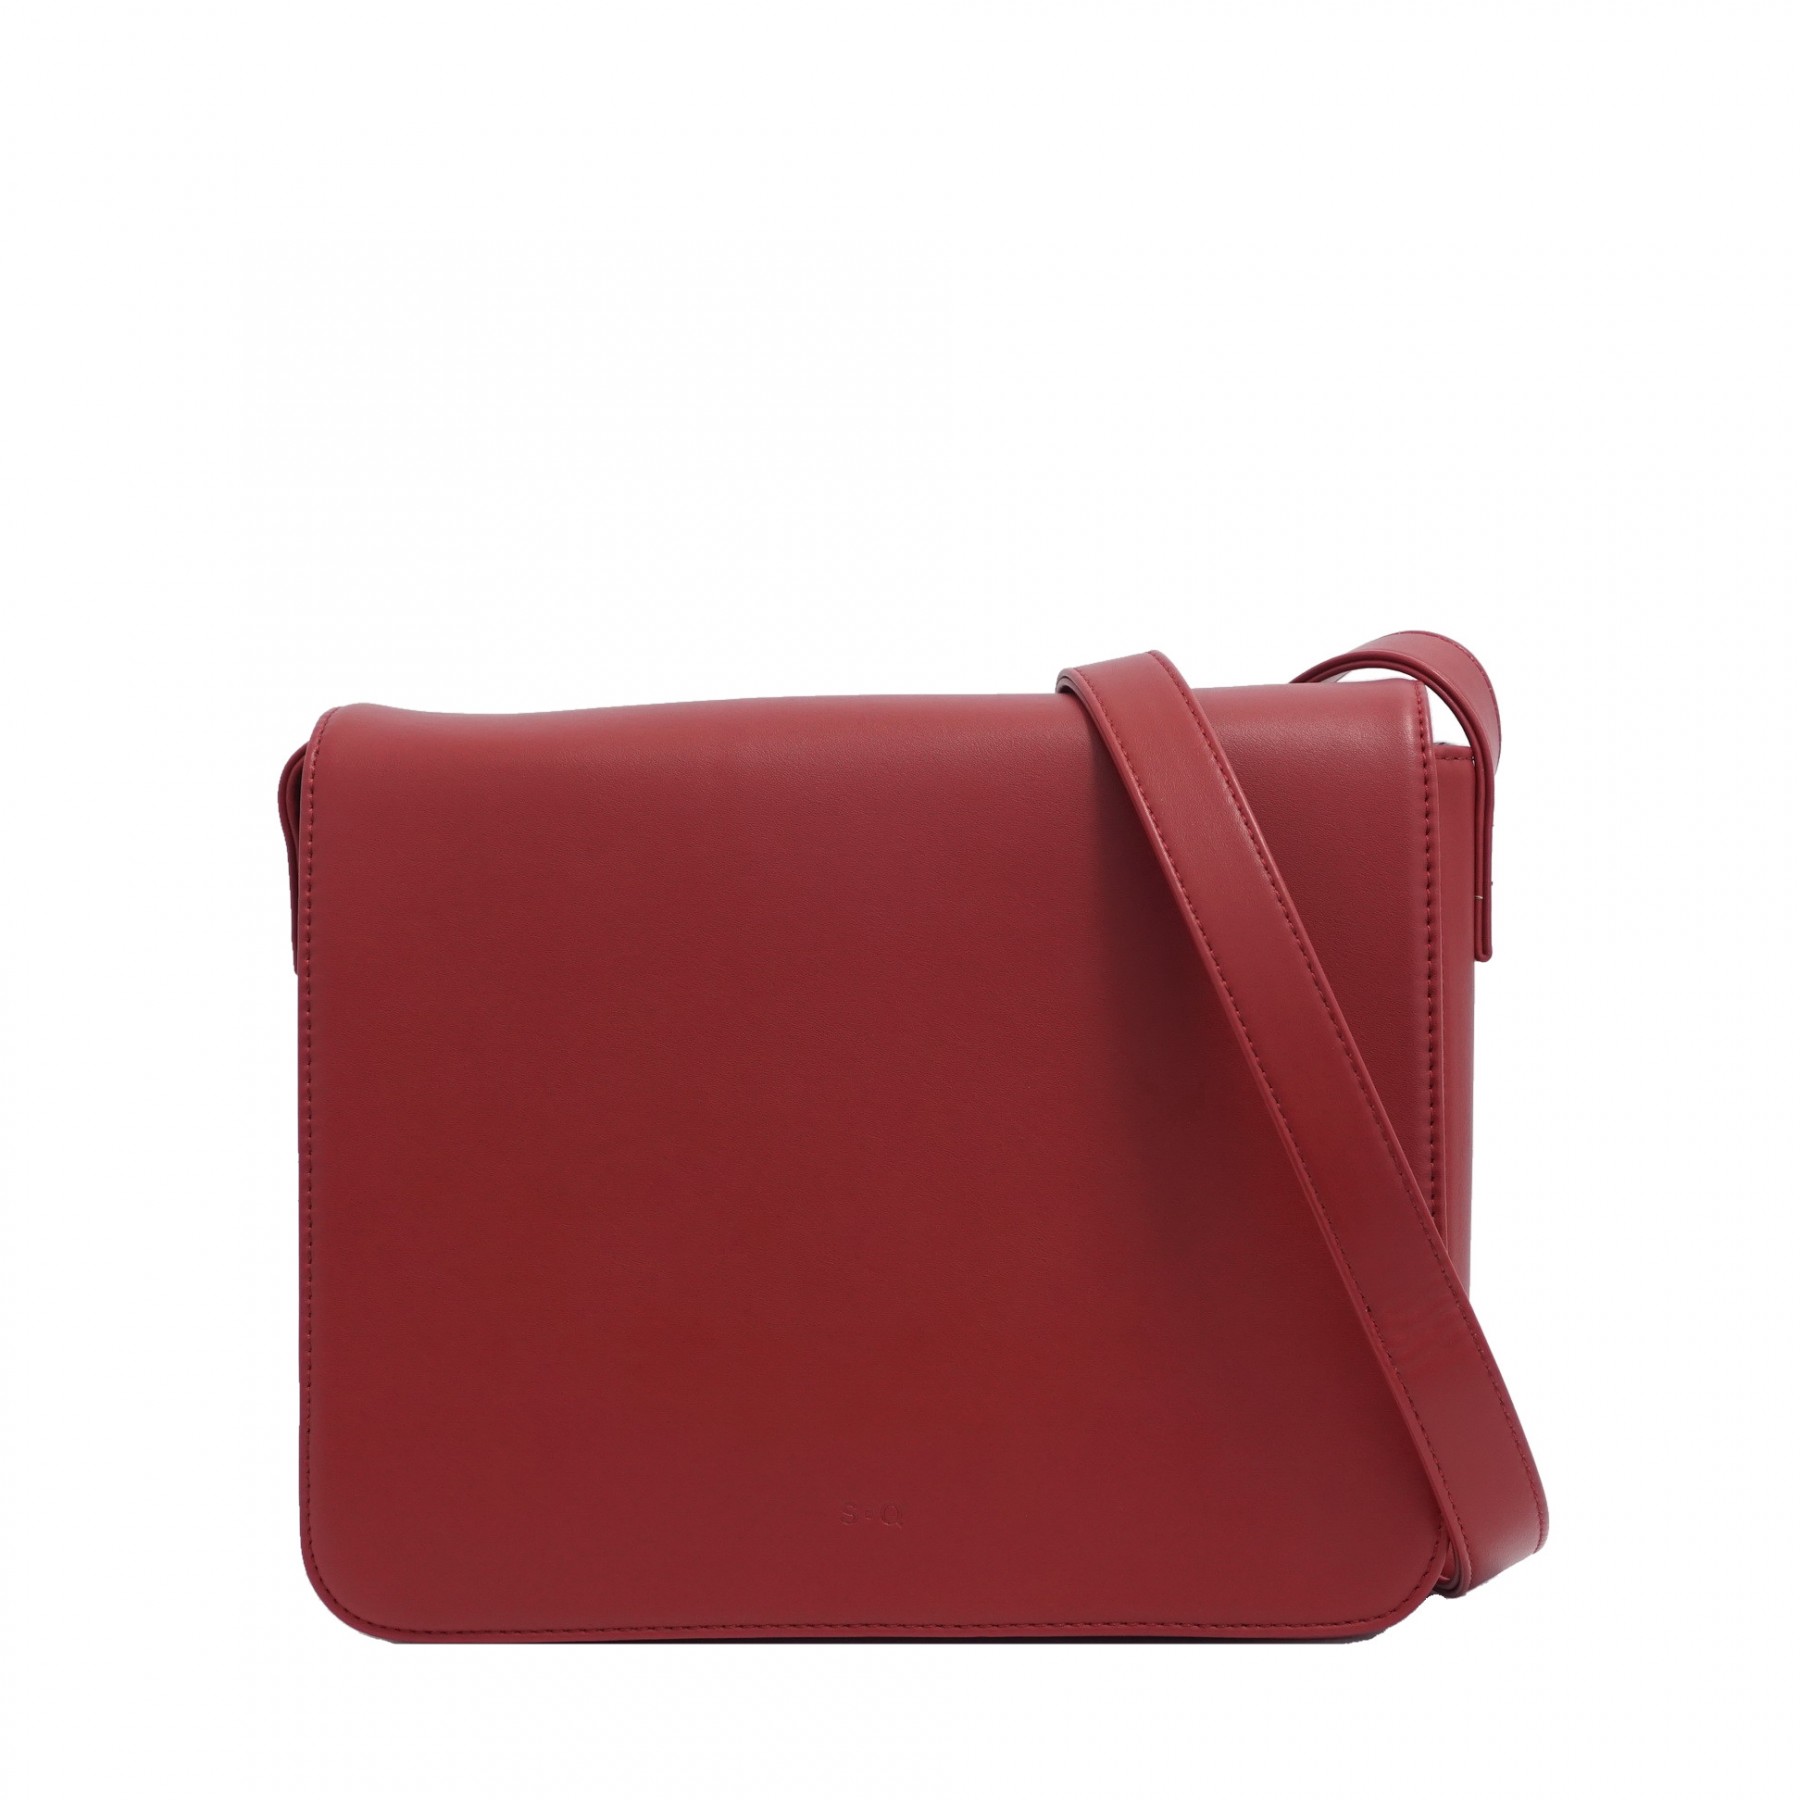 Risa Vancouver - Handcrafted Leather Bags & Accessories Online store – RISA  VANCOUVER